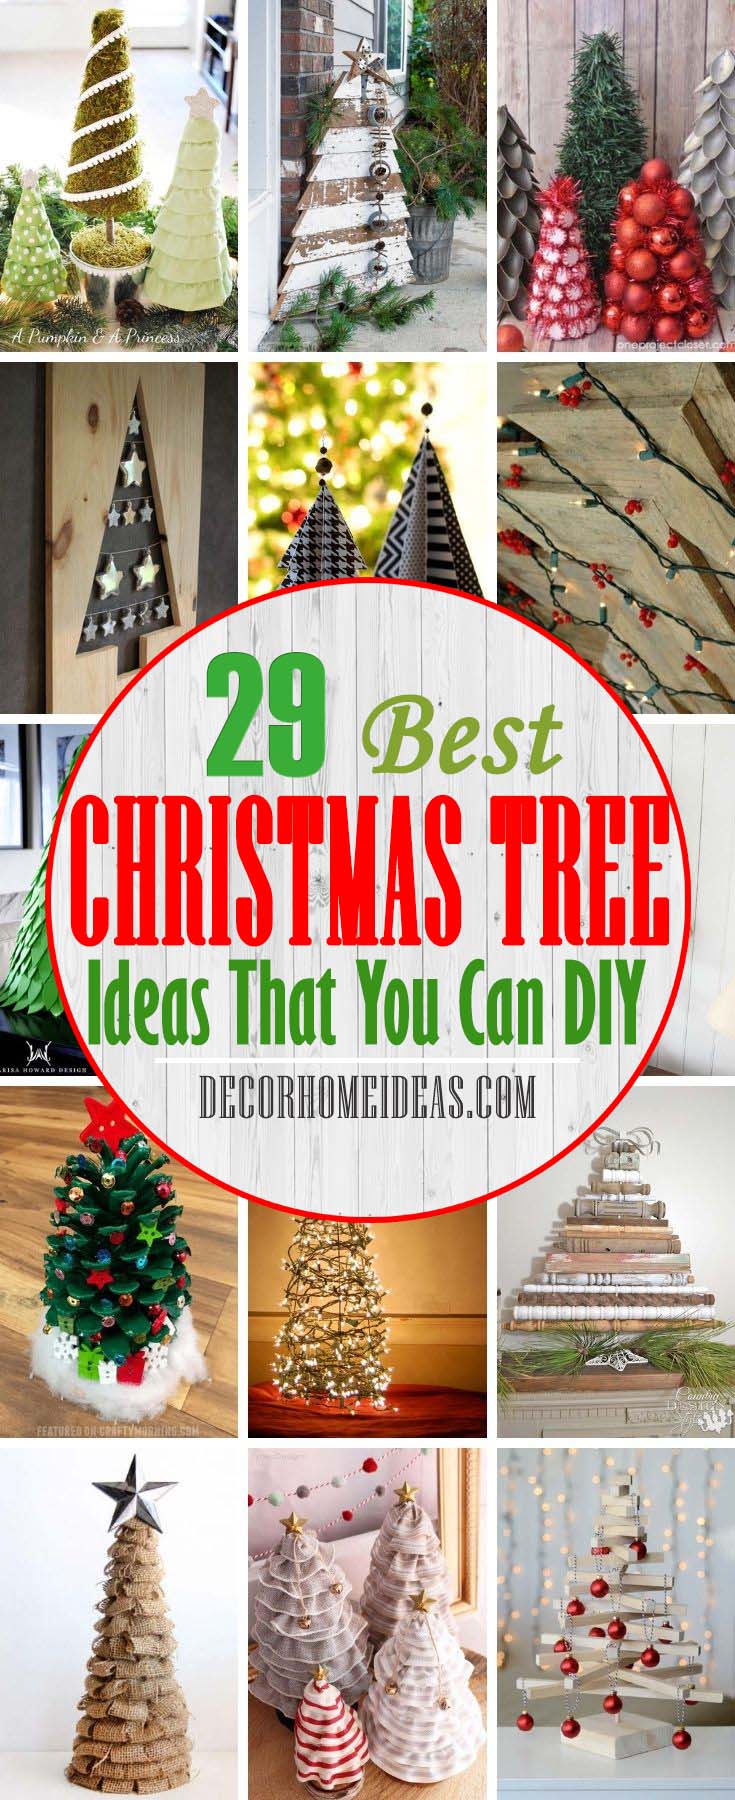 Best DIY Christmas Tree Ideas. People have started to think outside the box and now go for something more unconventional. Although Christmas is all about tradition, people been coming up with creative Christmas tree ideas so they can have unique décor. #decorhomeideas